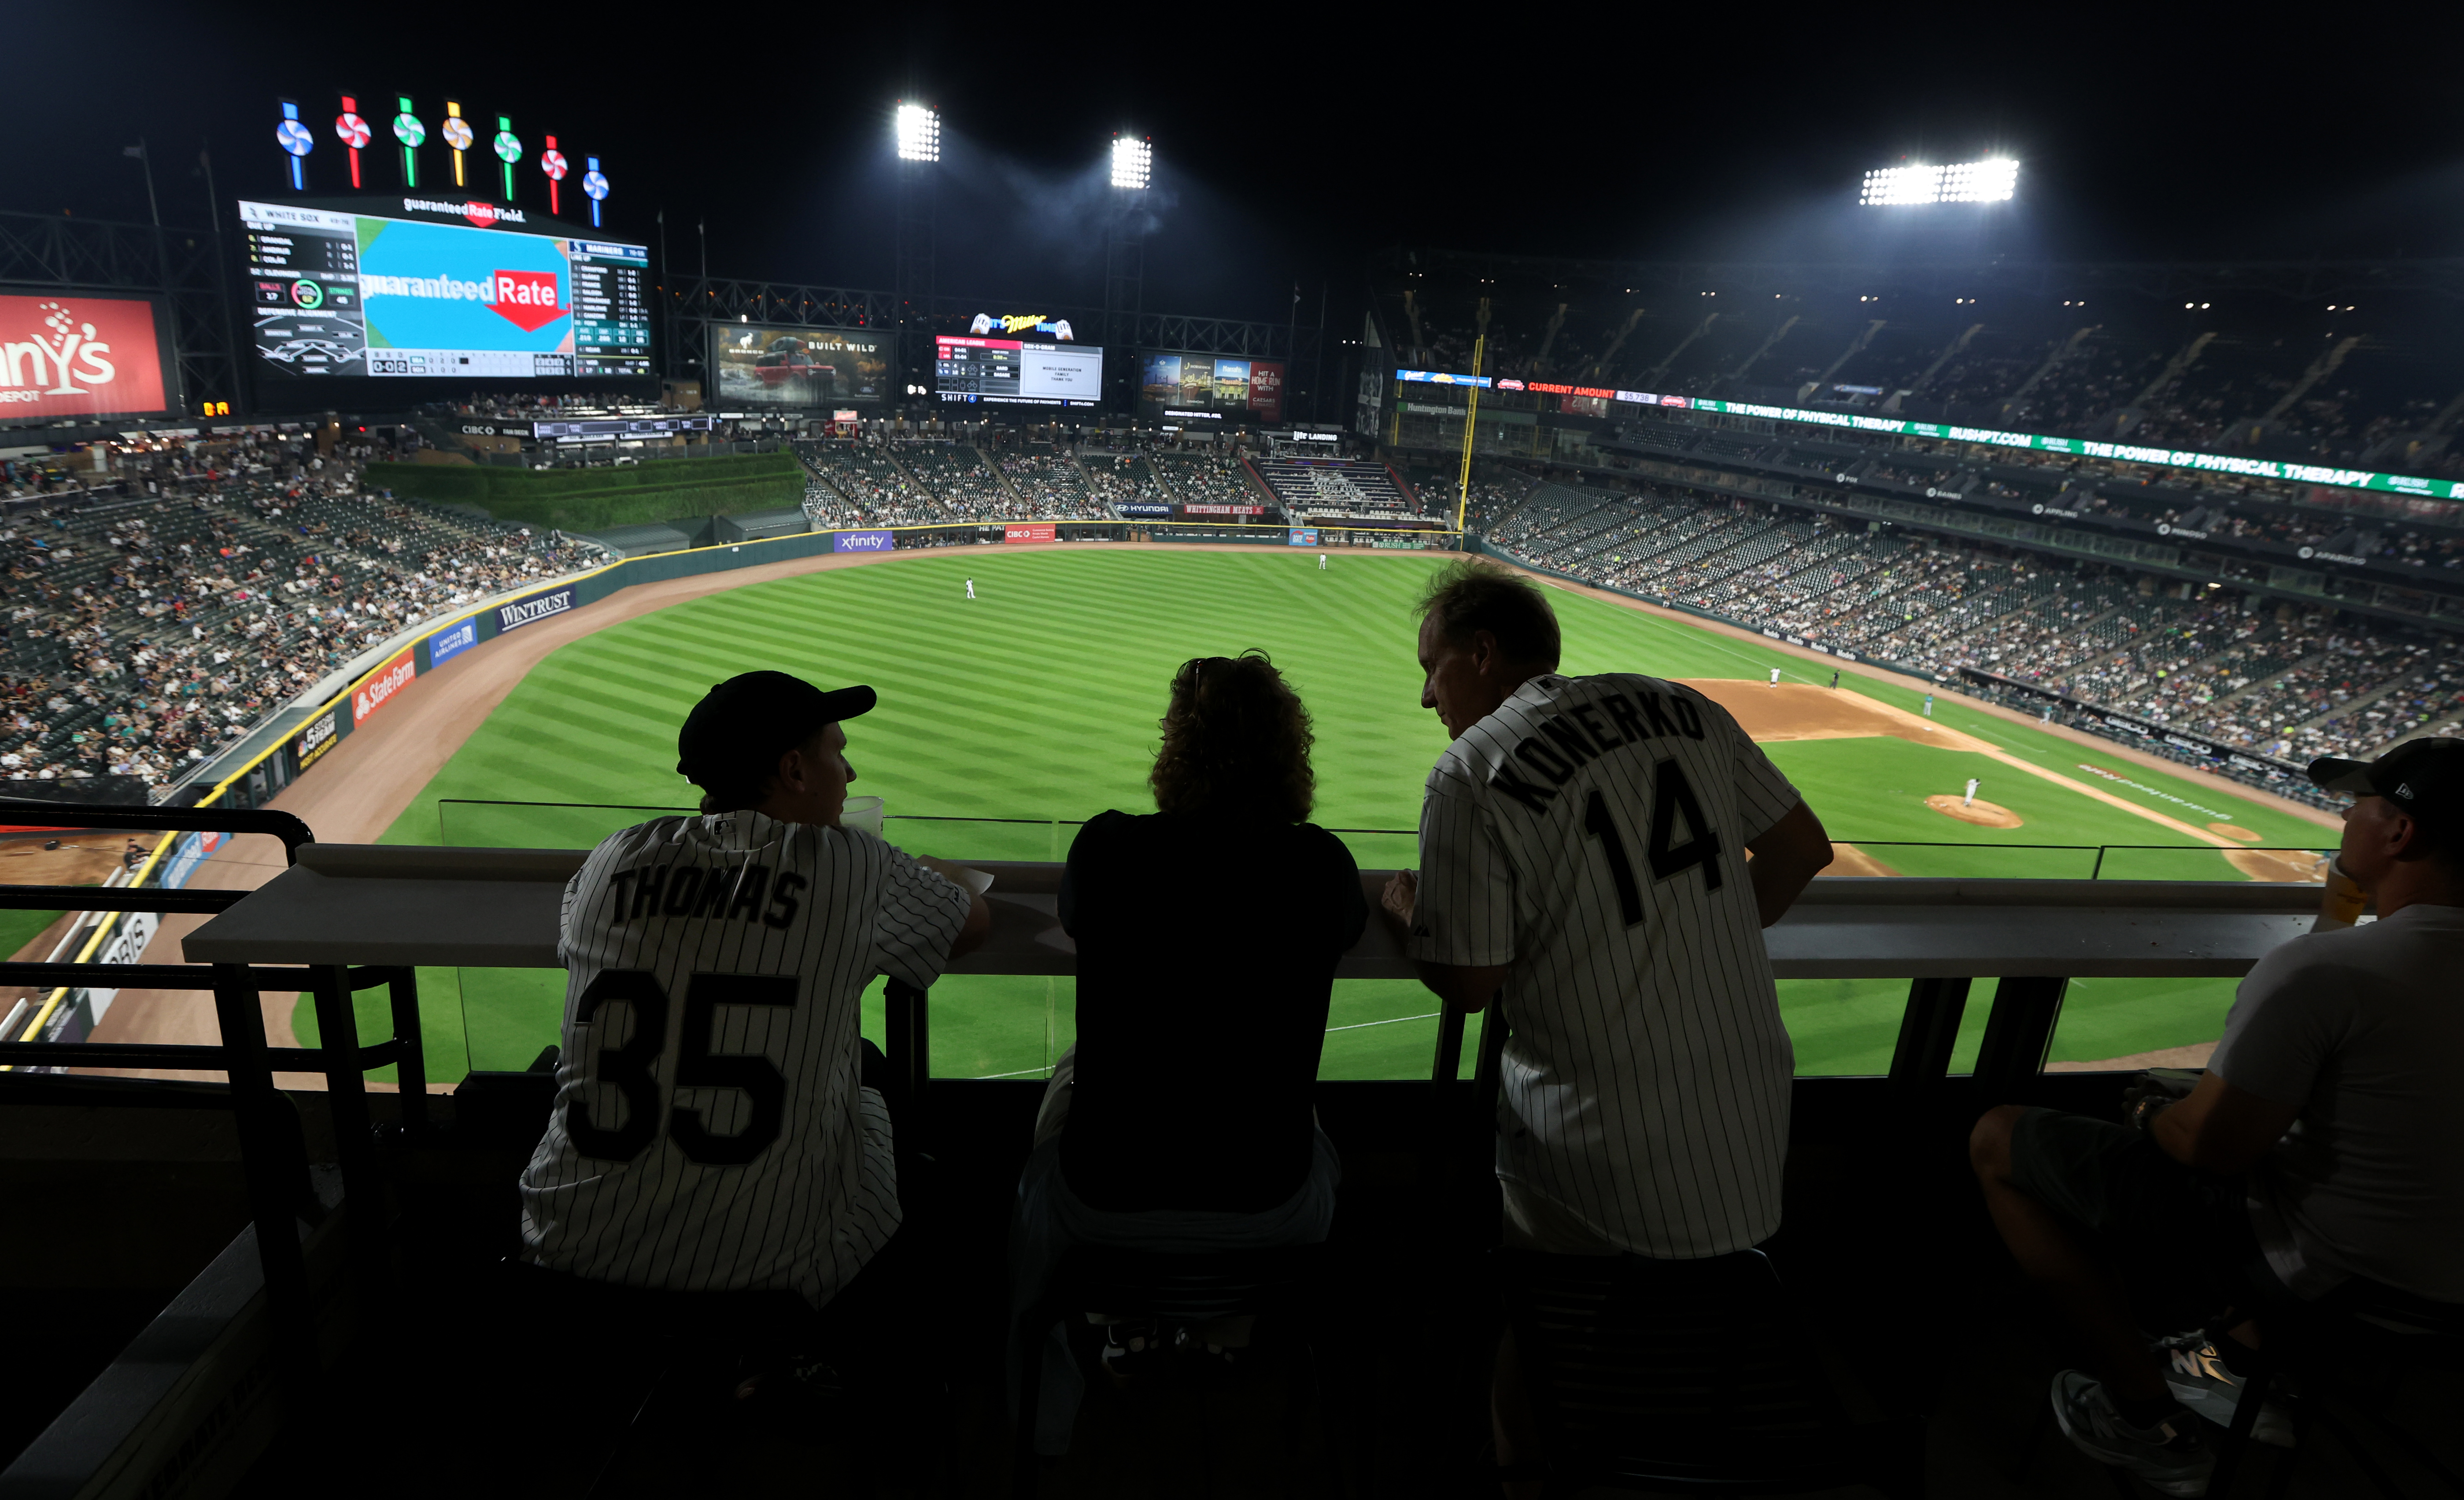 The White Sox's throwback uniforms made them look like an office beer  league team